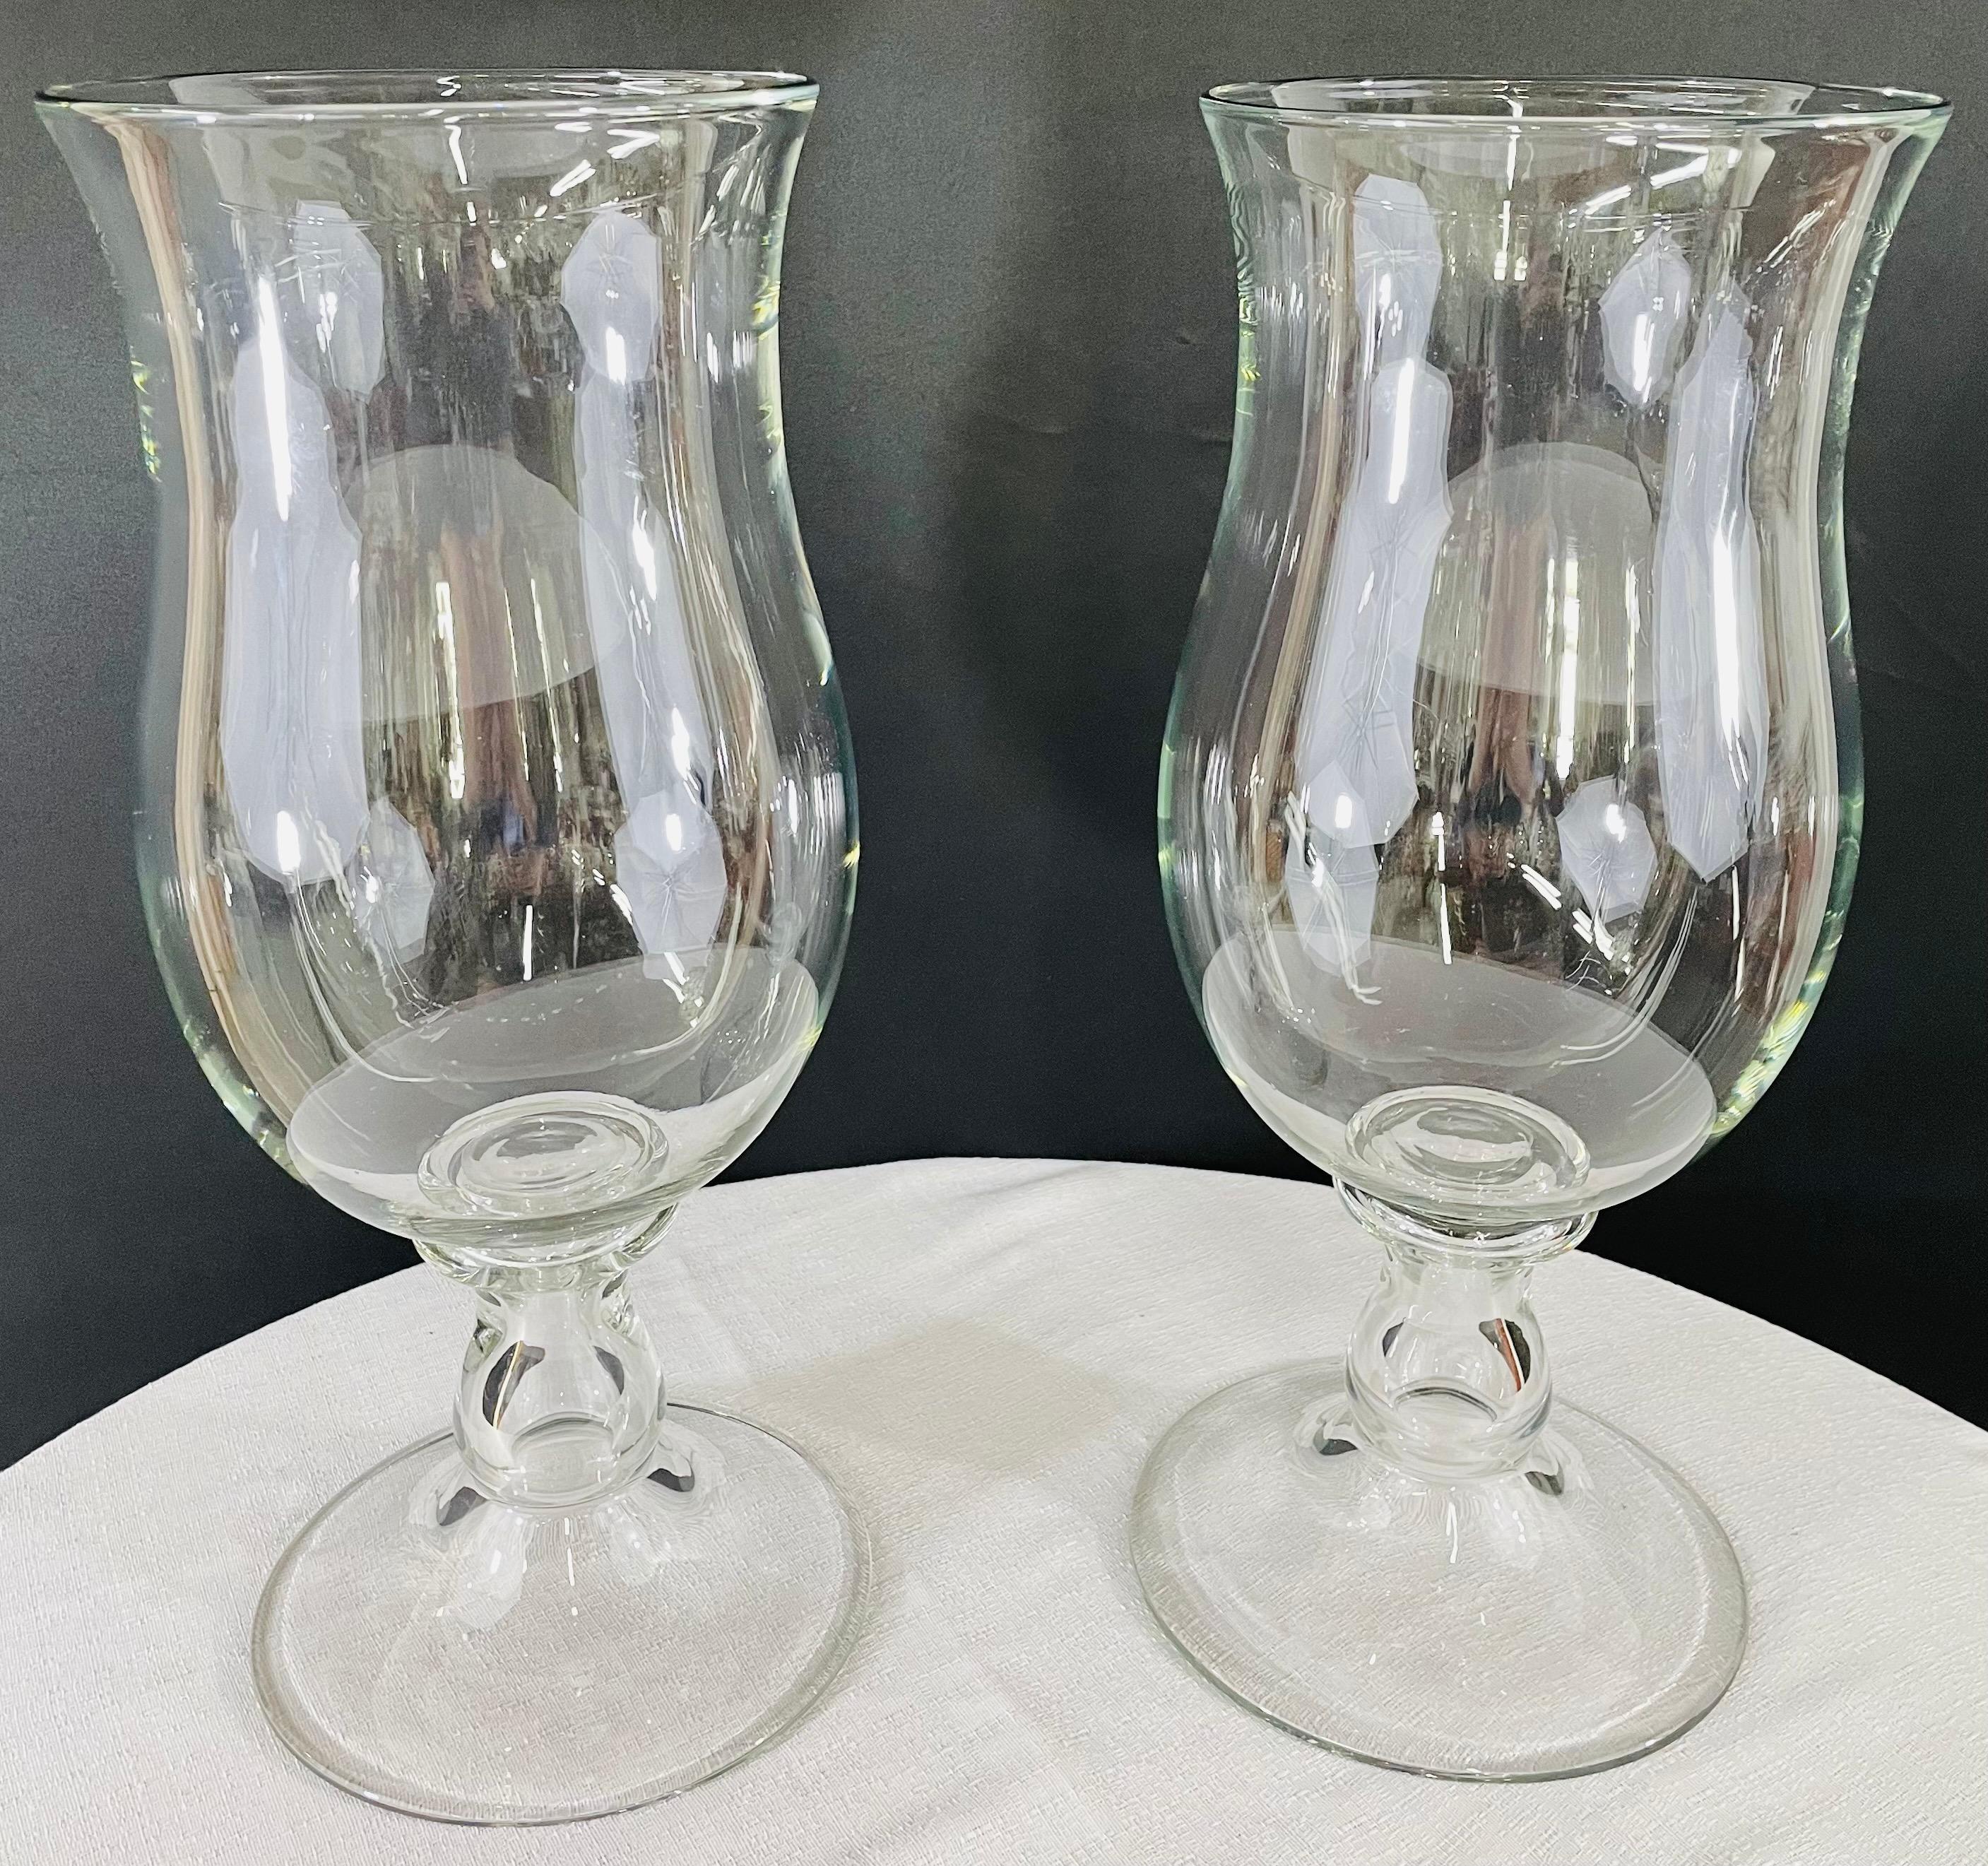 Contemporary Modern Clear Glass Candleholder or Vase, a Pair For Sale